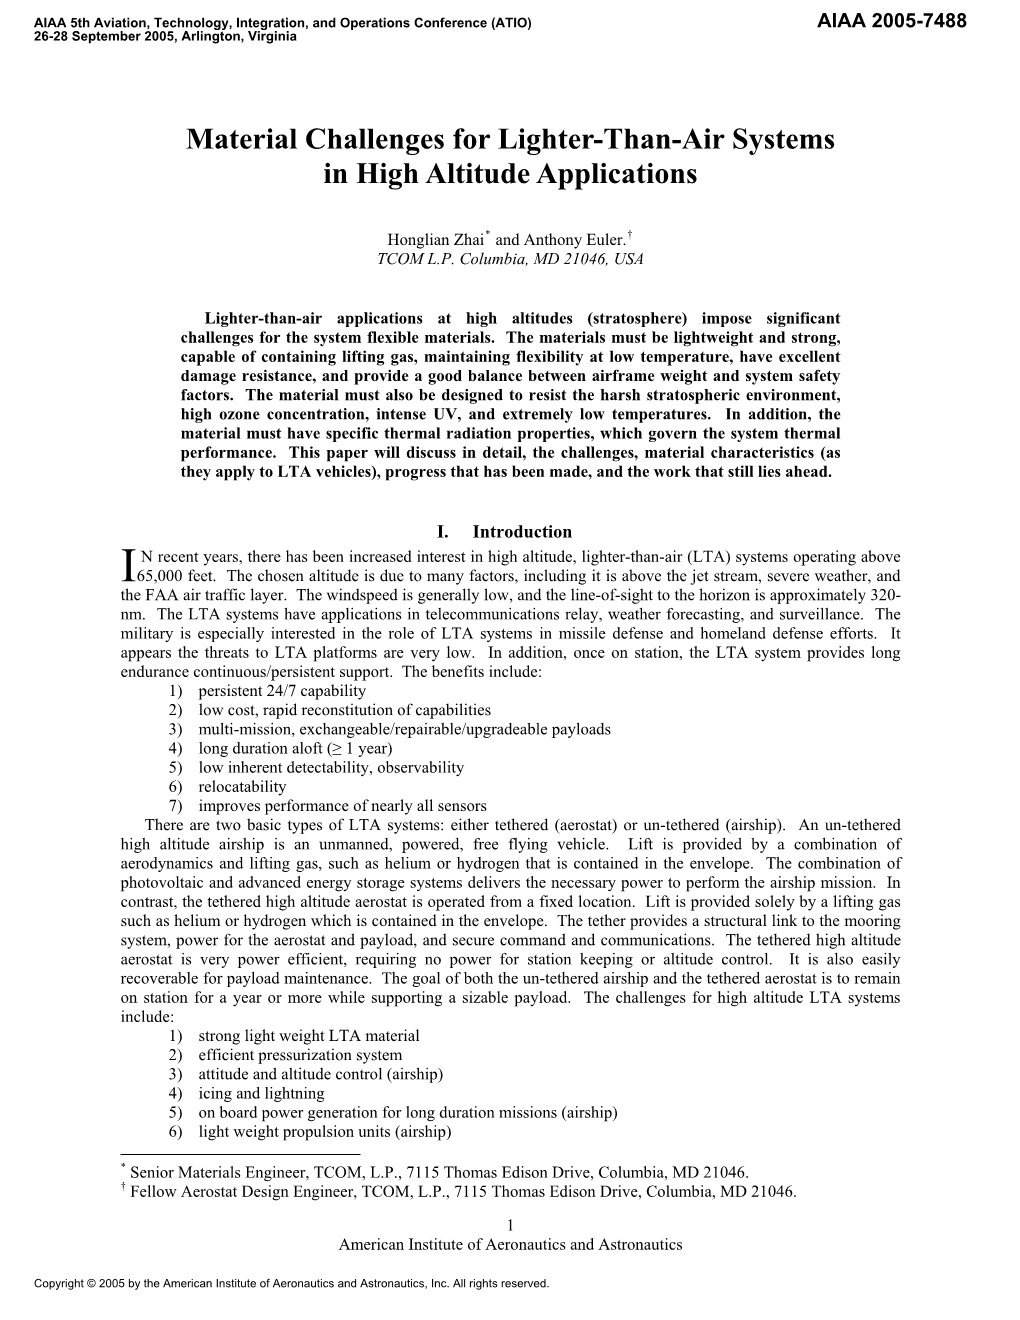 Material Challenges for Lighter-Than-Air Systems in High Altitude Applications